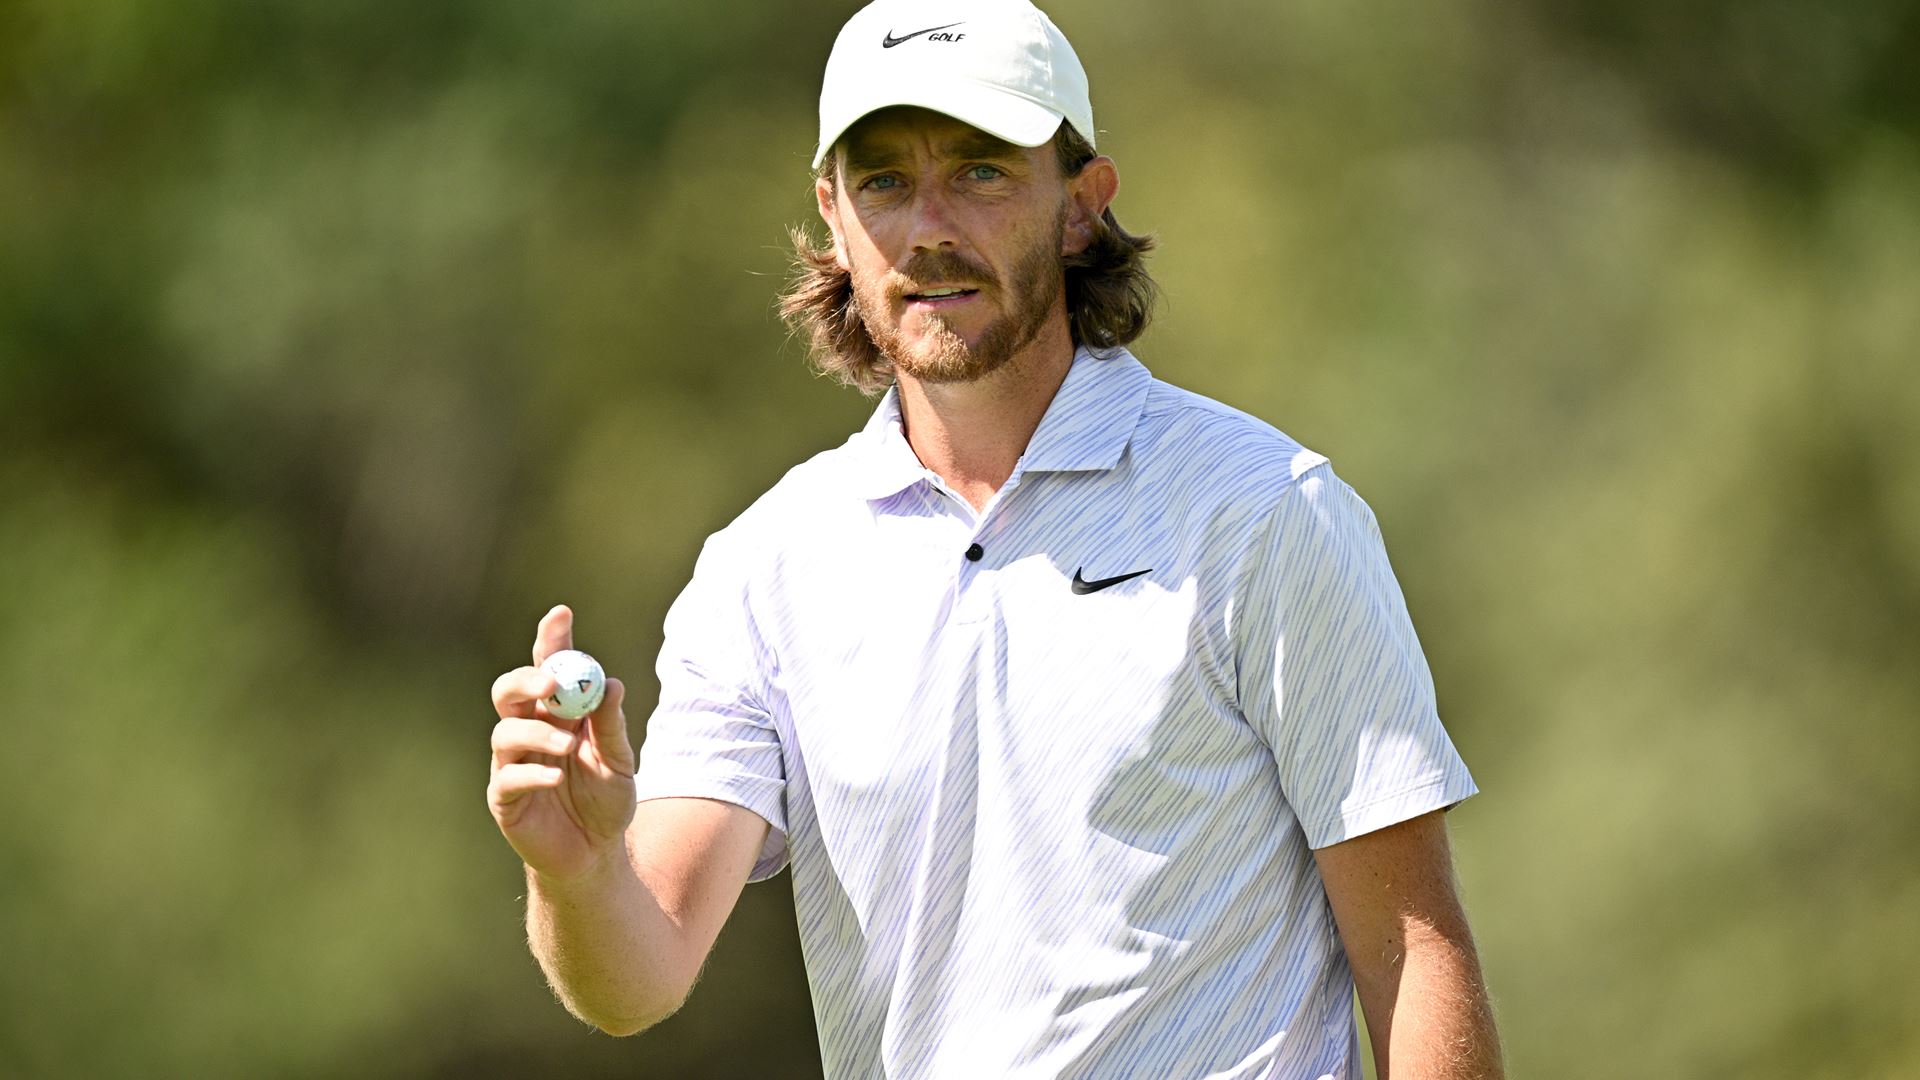 Tommy Fleetwood Captures Back-to-Back Wins at the Nedbank Golf Challenge with Stealth Plus Driver and TP5x Pix Golf Ball